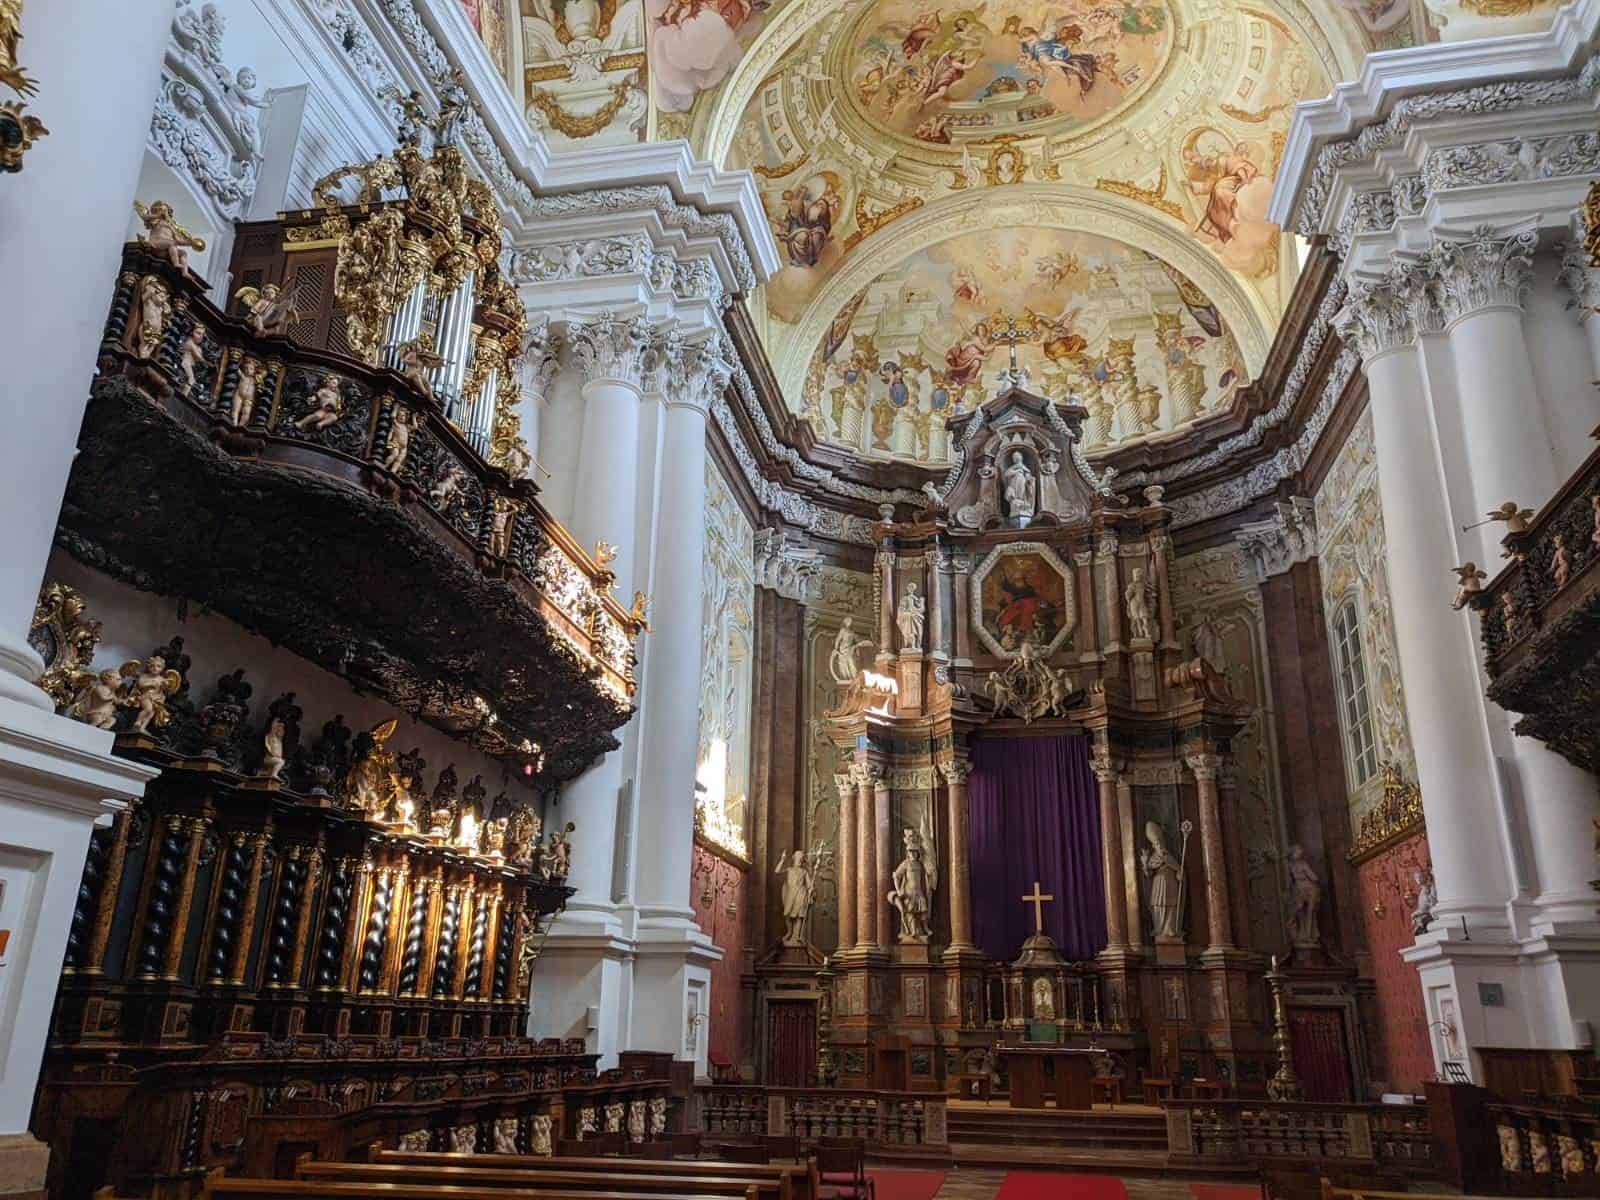 Within the basilica at St Florian